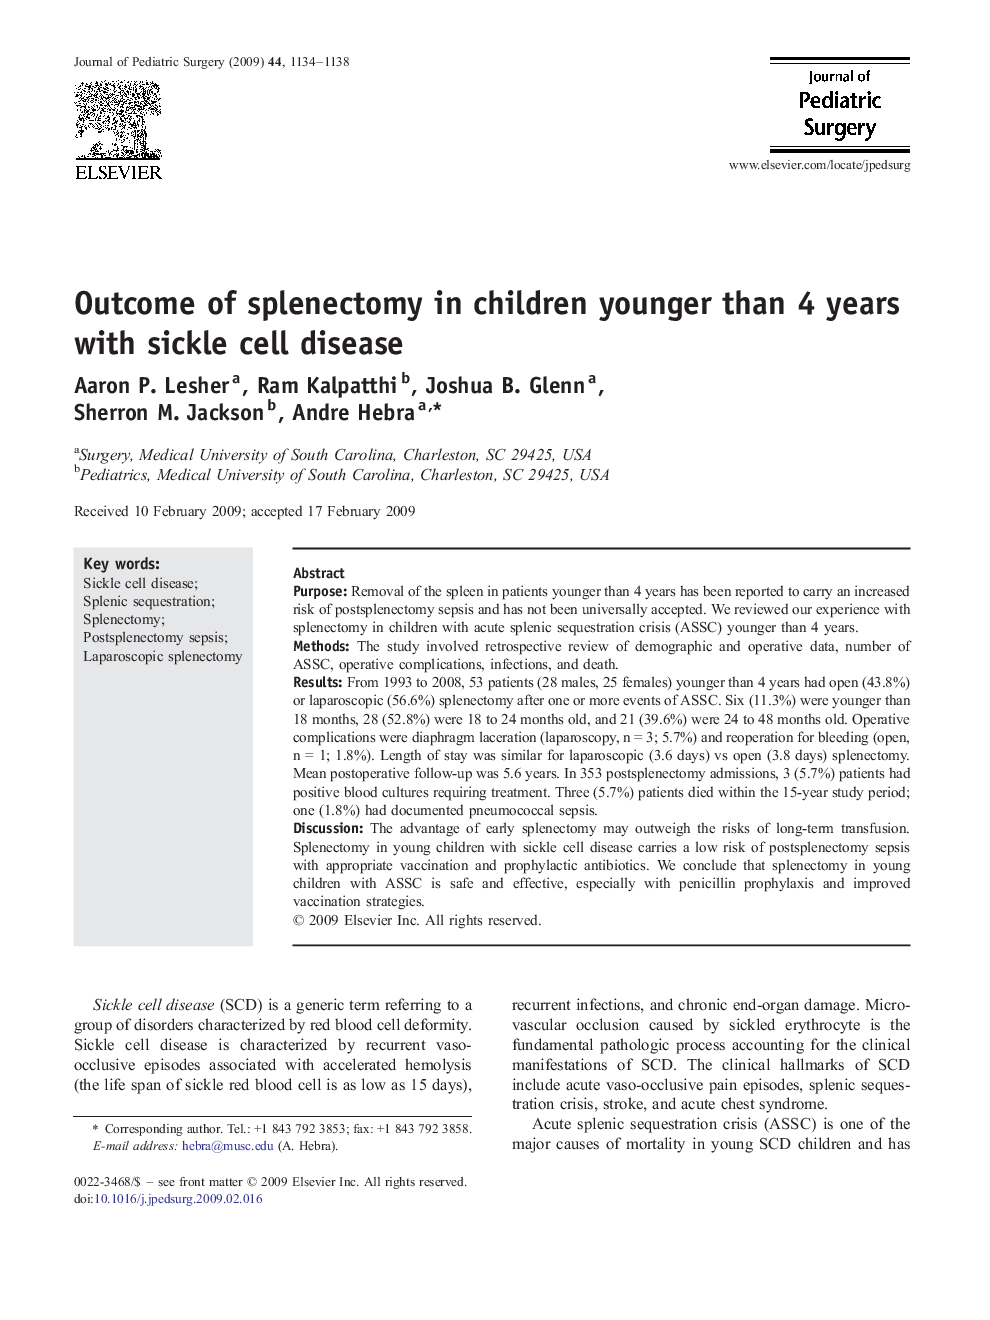 Outcome of splenectomy in children younger than 4 years with sickle cell disease